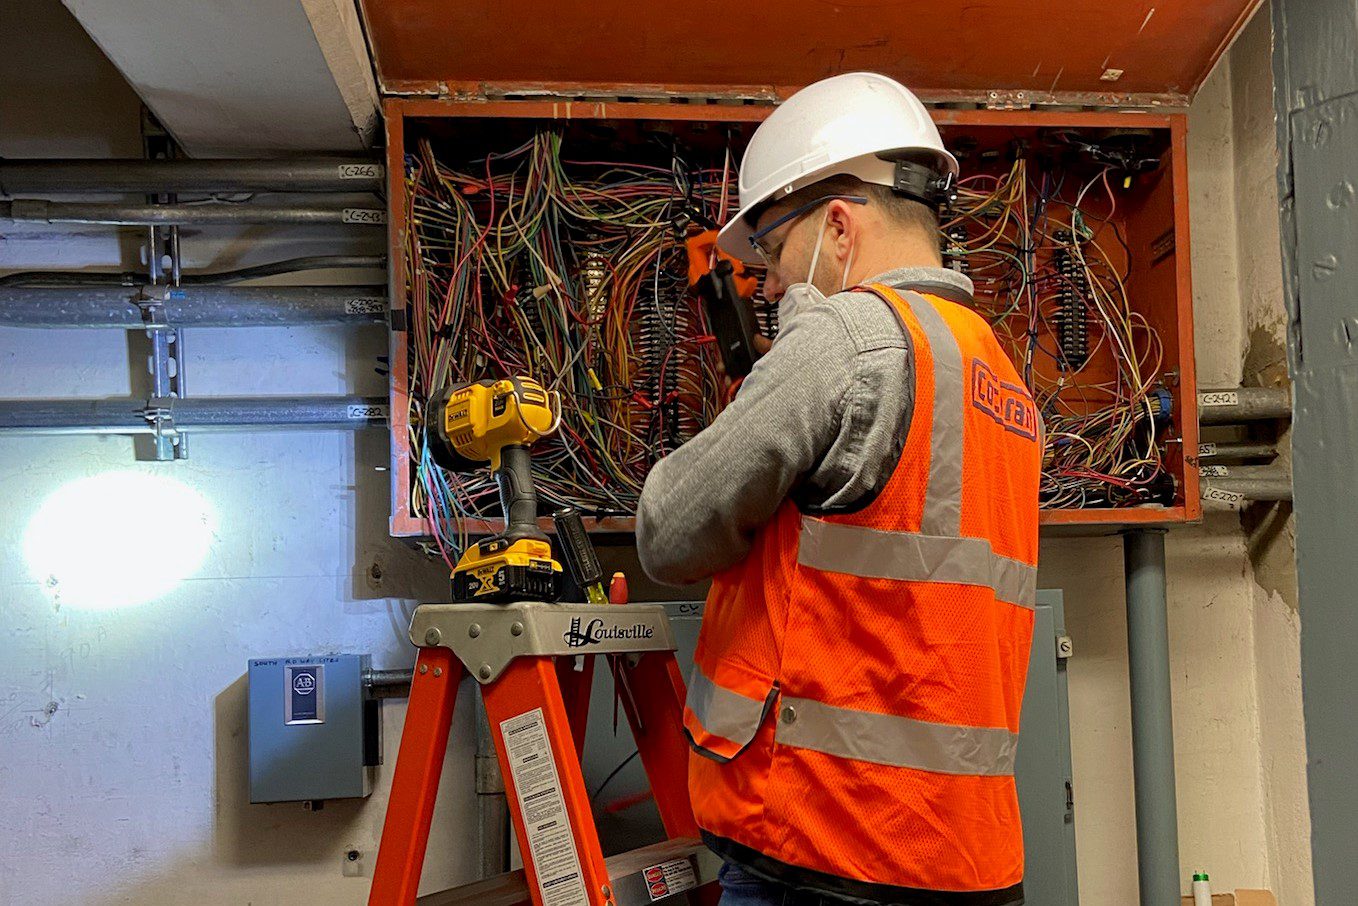 An engineer works on an electrical panel in the University Bridge in Seattle. The worker is wearing an orange safety vest and white hard hat, and eye protection, as he works on the electrical wiring shown in the photo.